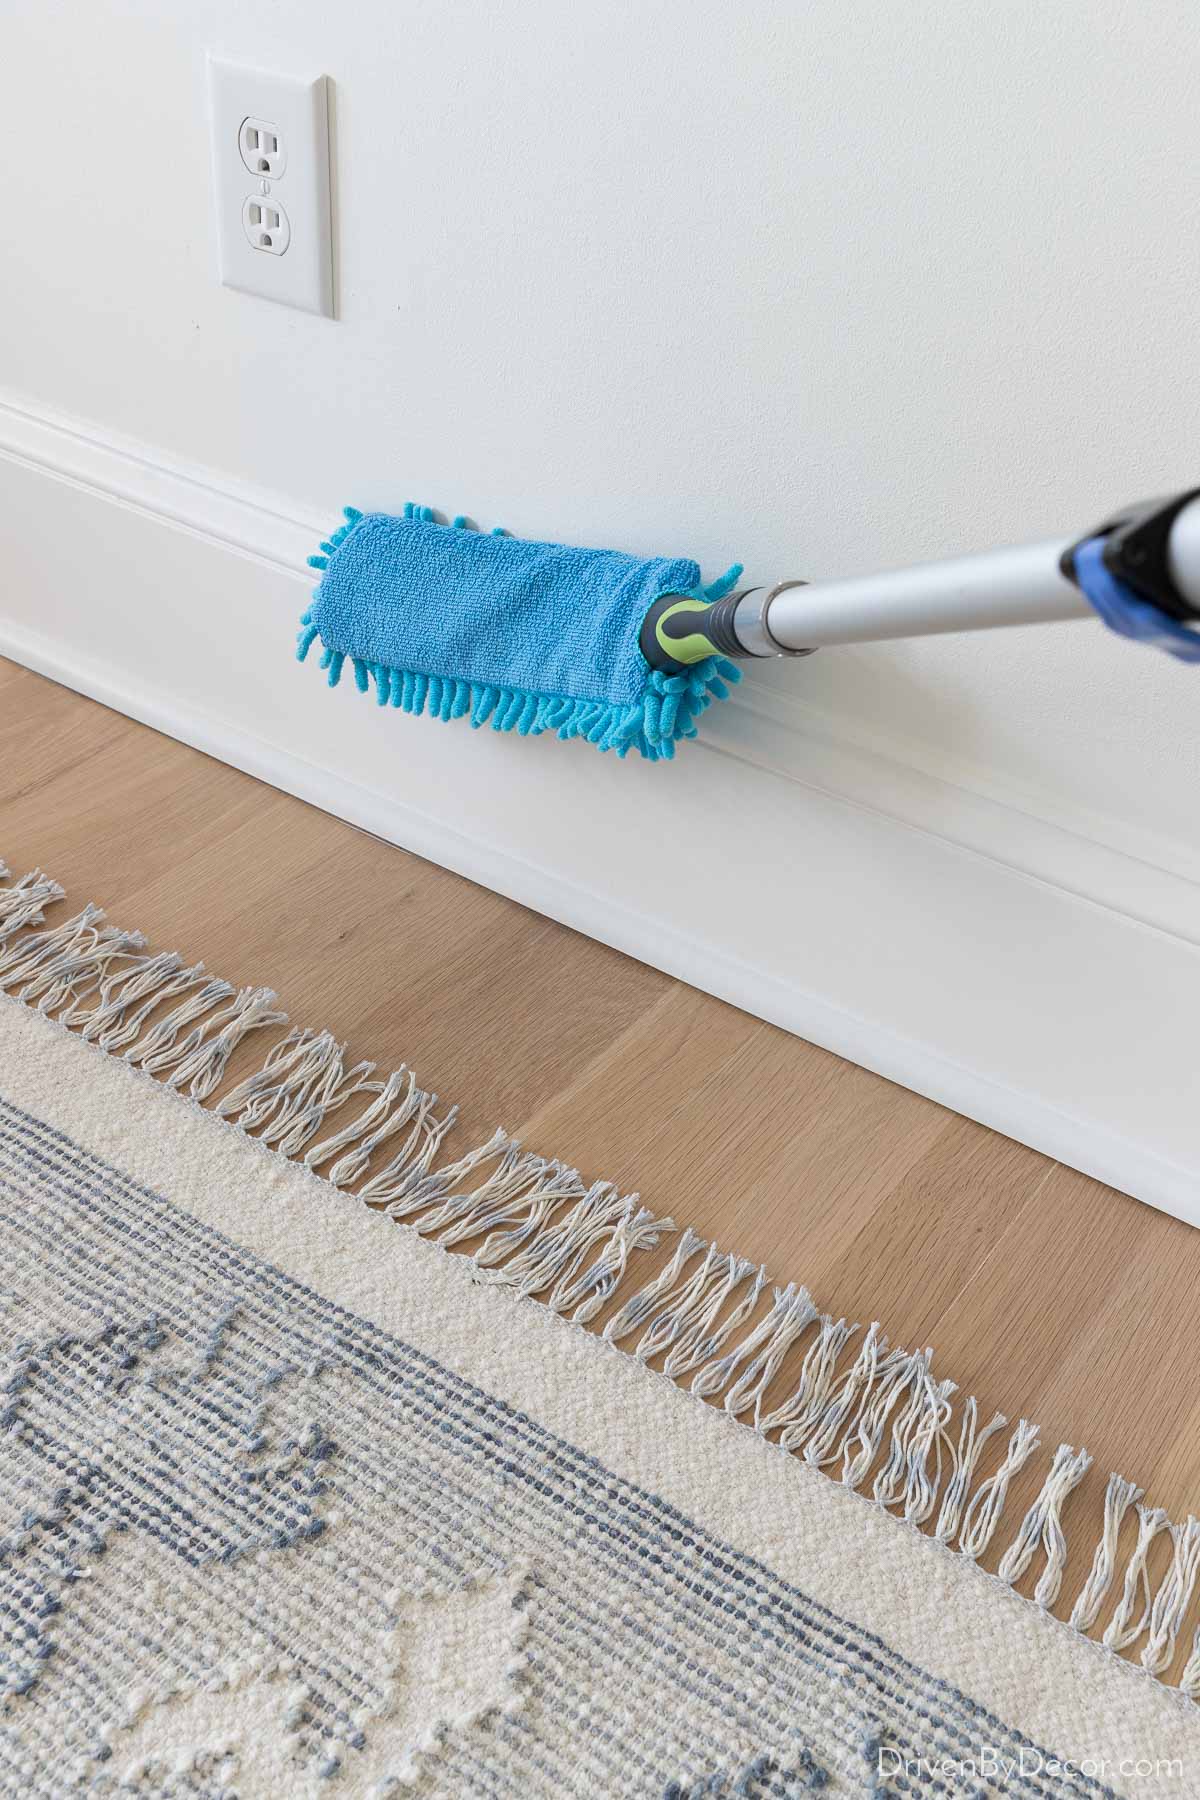 Cleaning tool that works well to clean baseboards without bending over!